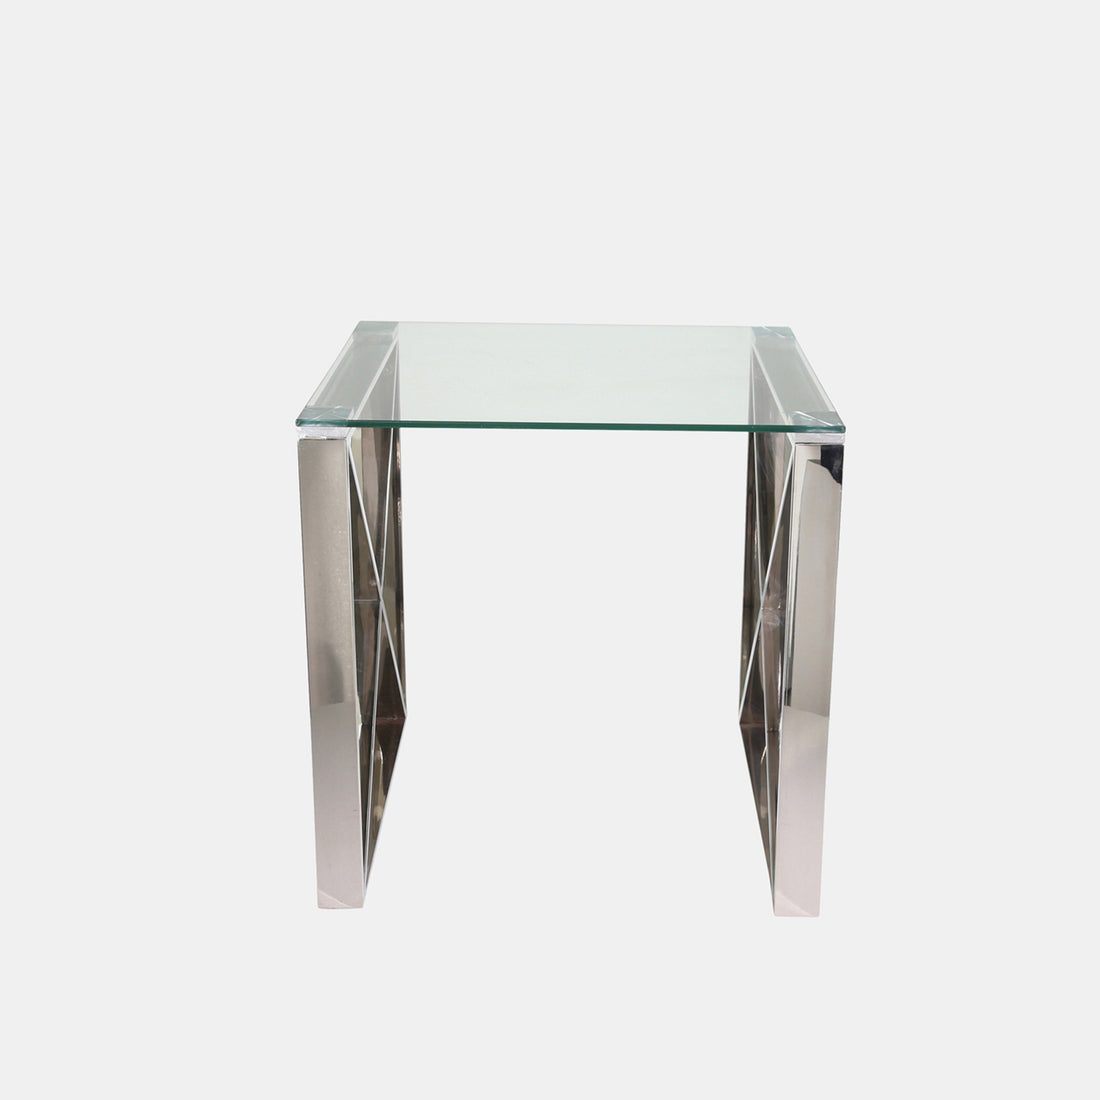 Sagebrook Home Silver Metal/glass Accent Table, Kd